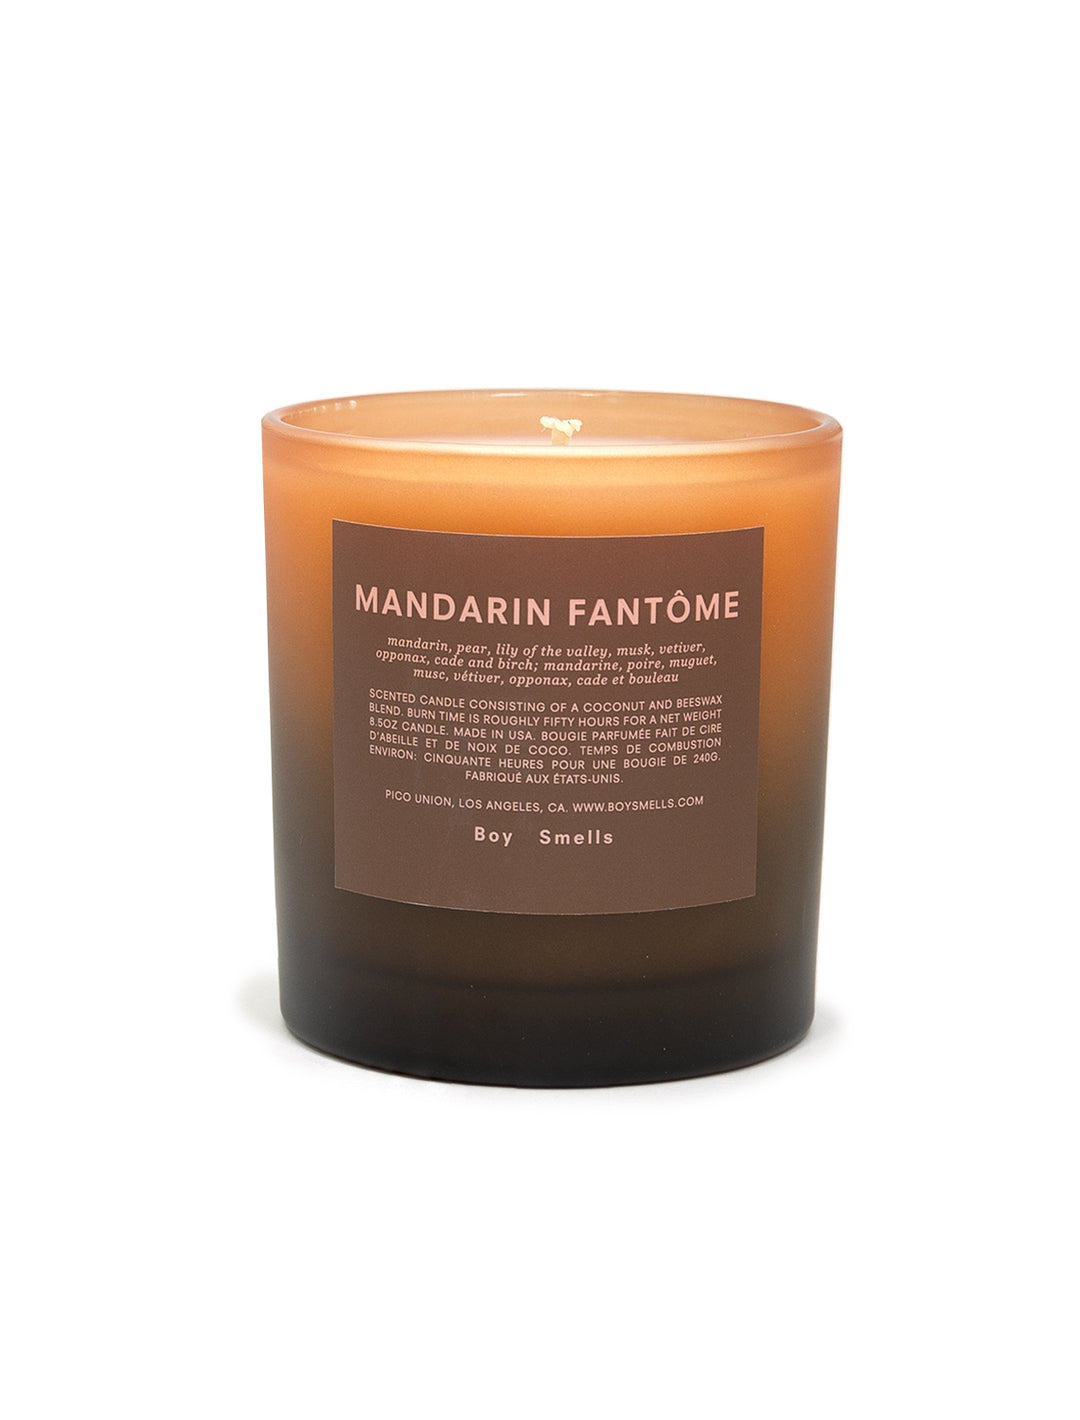 Front view of Boy Smells' mandarin fantome candle.